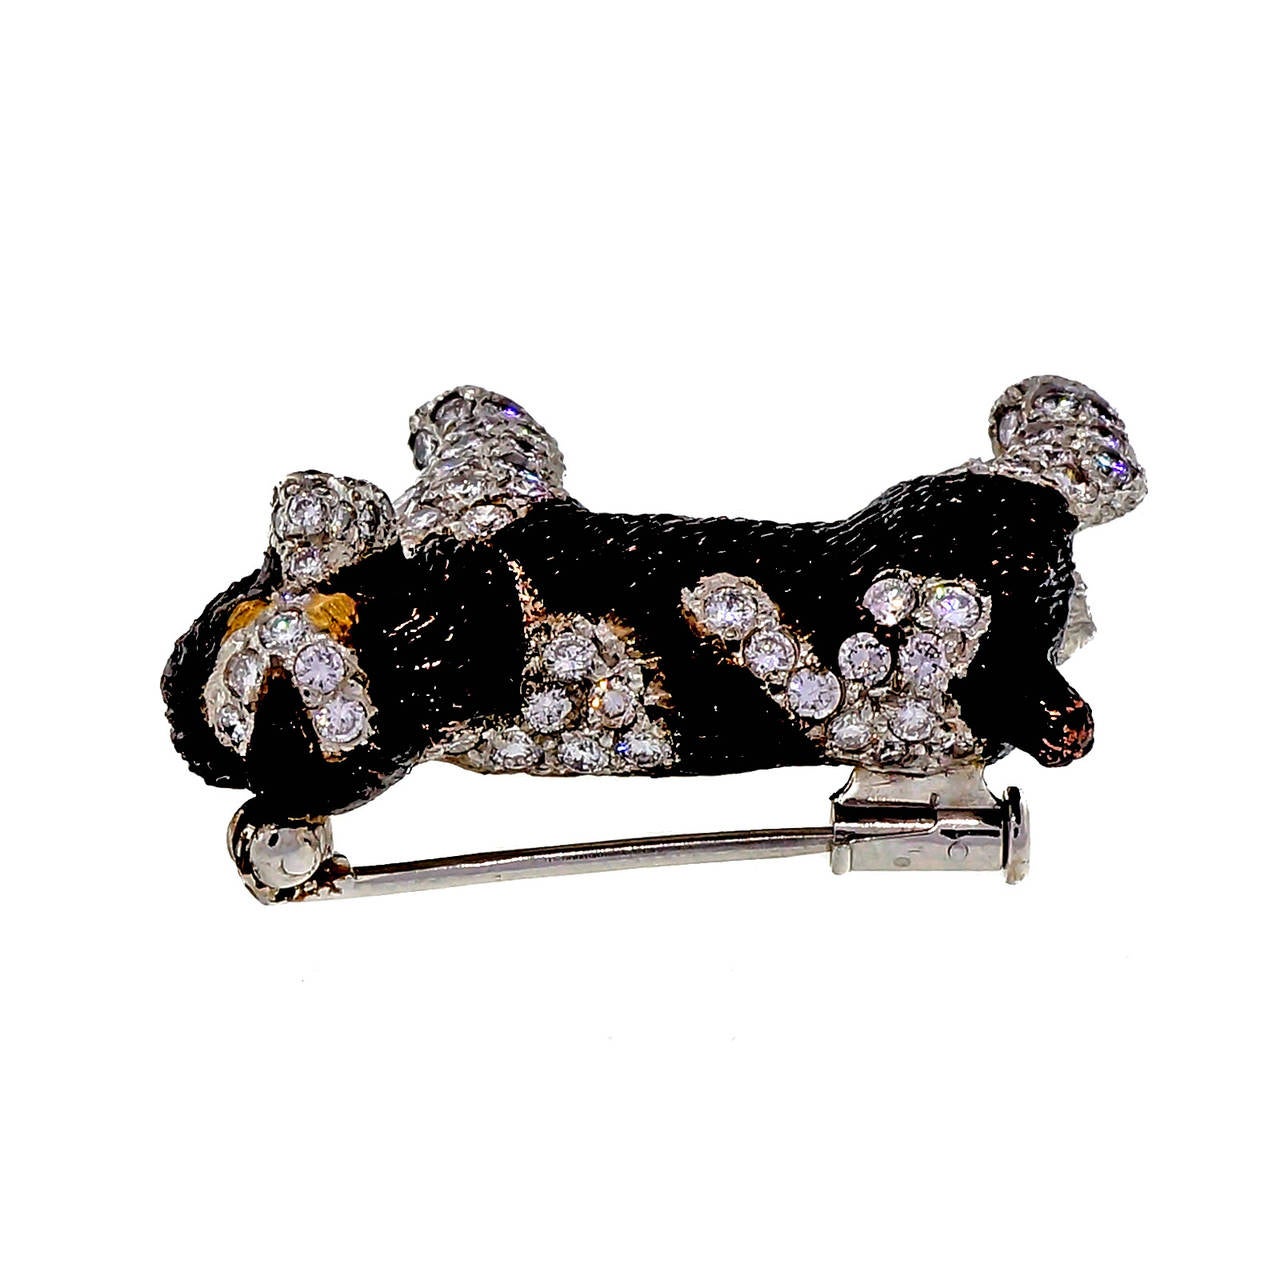 Maker E. Wolfe,  Brittany or Springer Spaniel 18k white gold dog brooch. Extra fine workmanship and material. E. Wolfe started in 1850 and have been jewelers to the crown heads of Europe. They are most famous for Tiara’s and animals. 

93 round